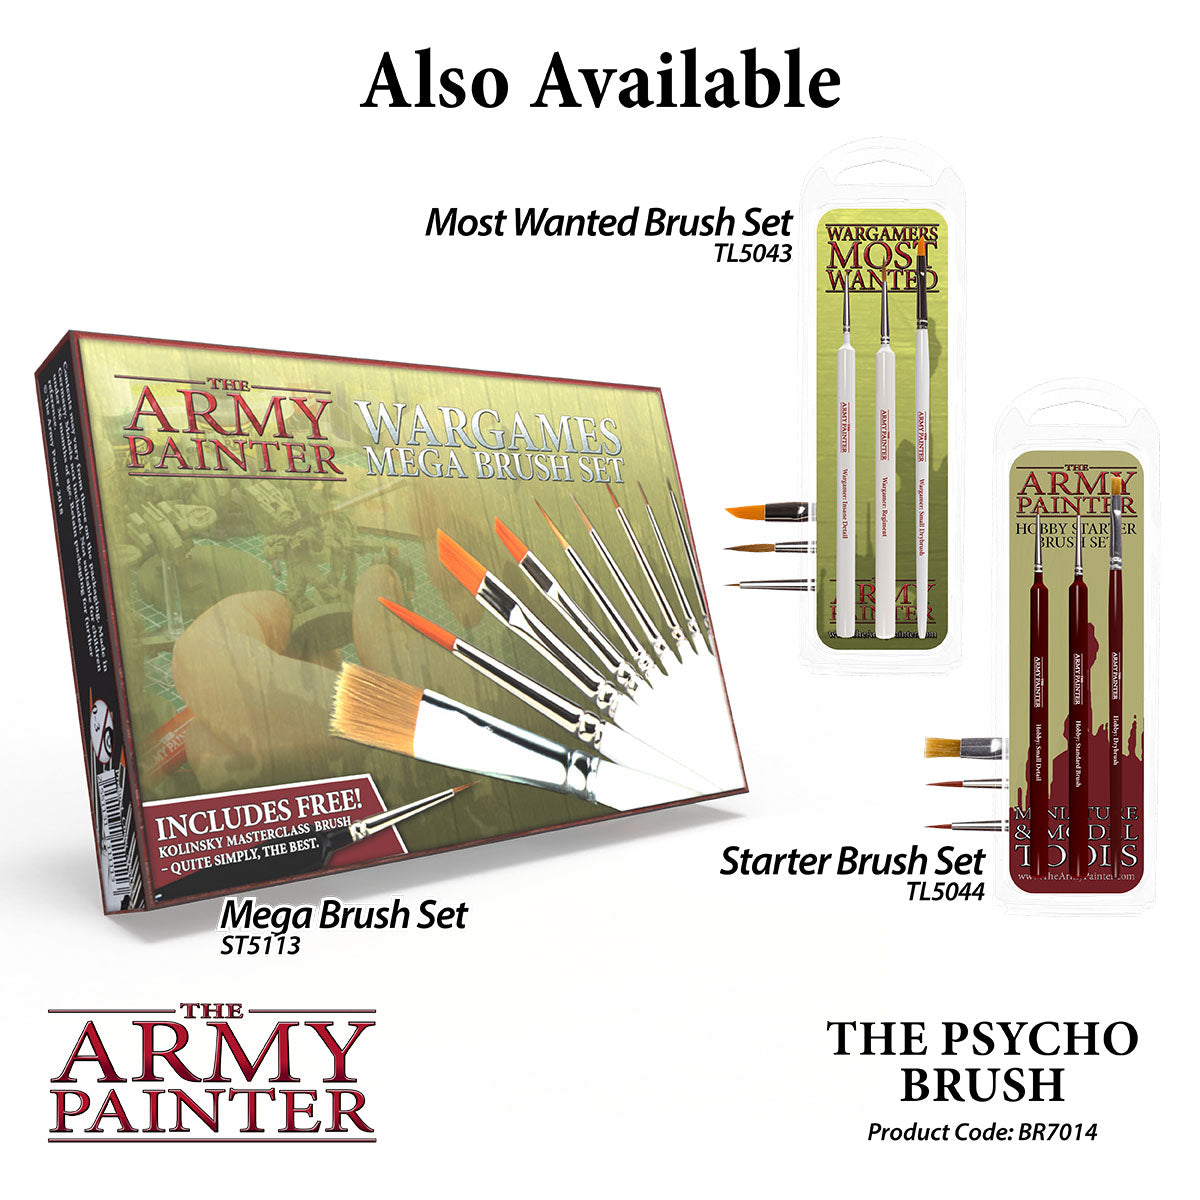 Army Painter Brush: The Psycho - Lets Play: Games & Toys